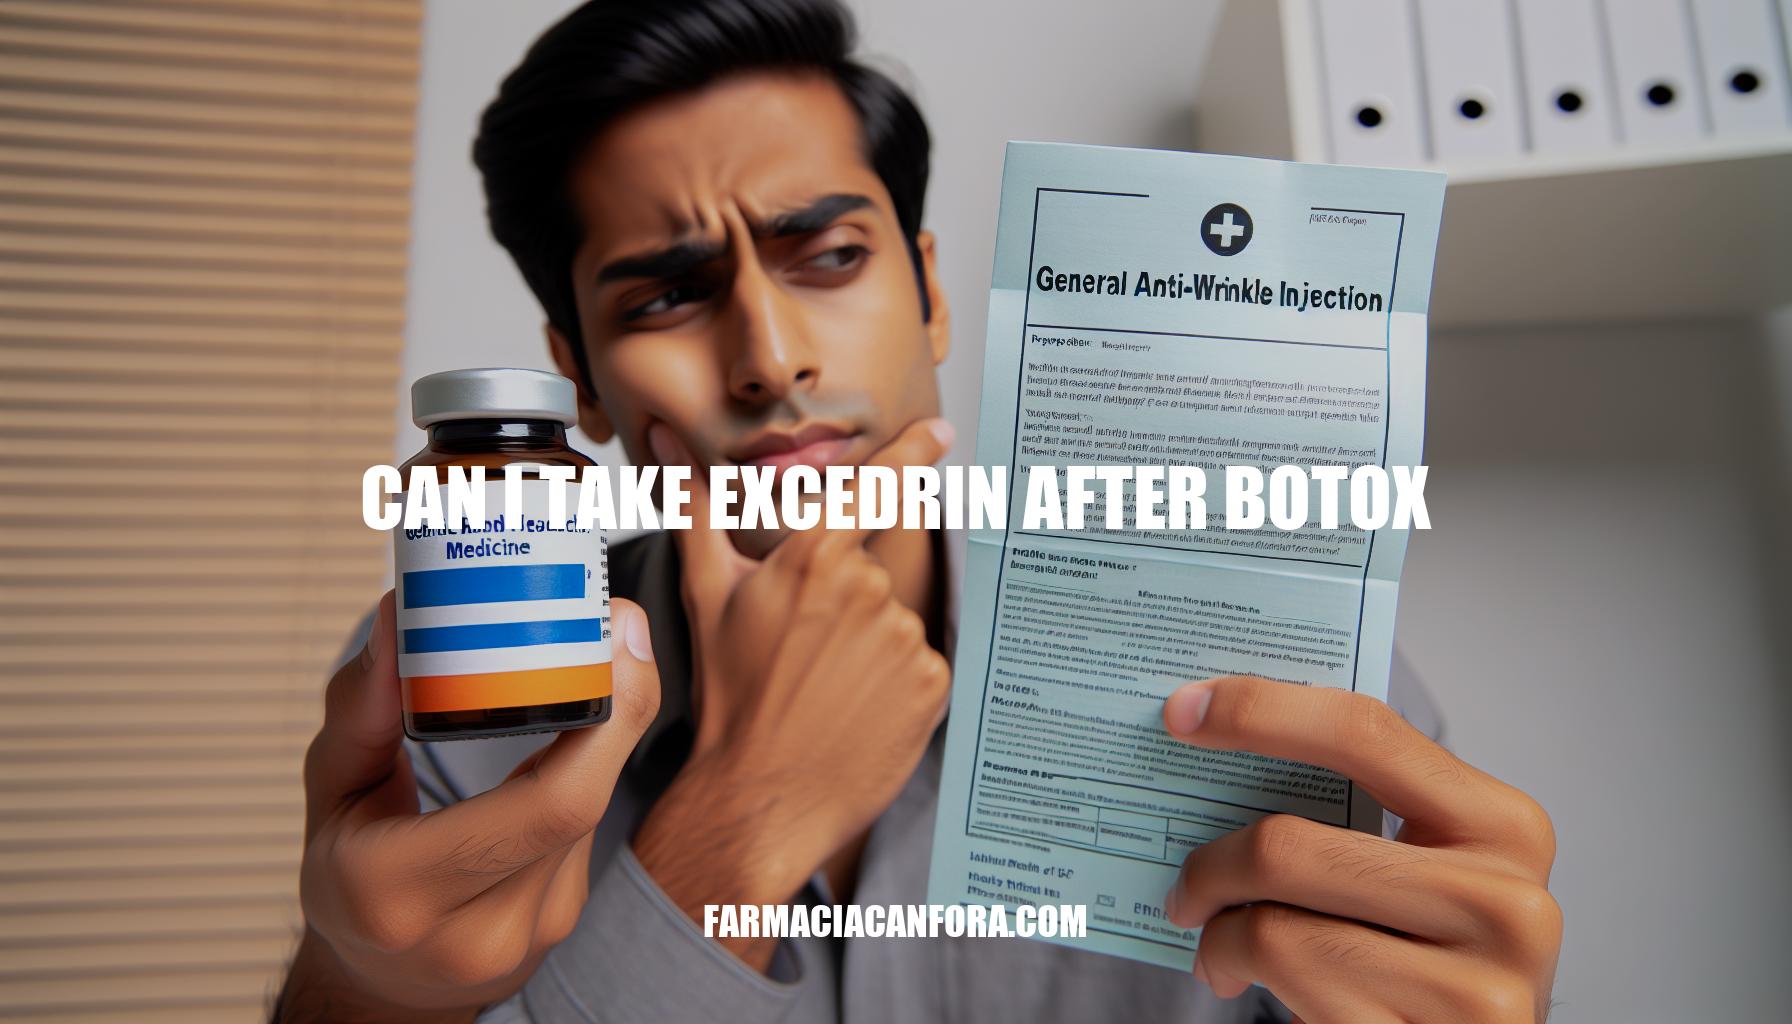 Can I Take Excedrin After Botox: Safety and Risks